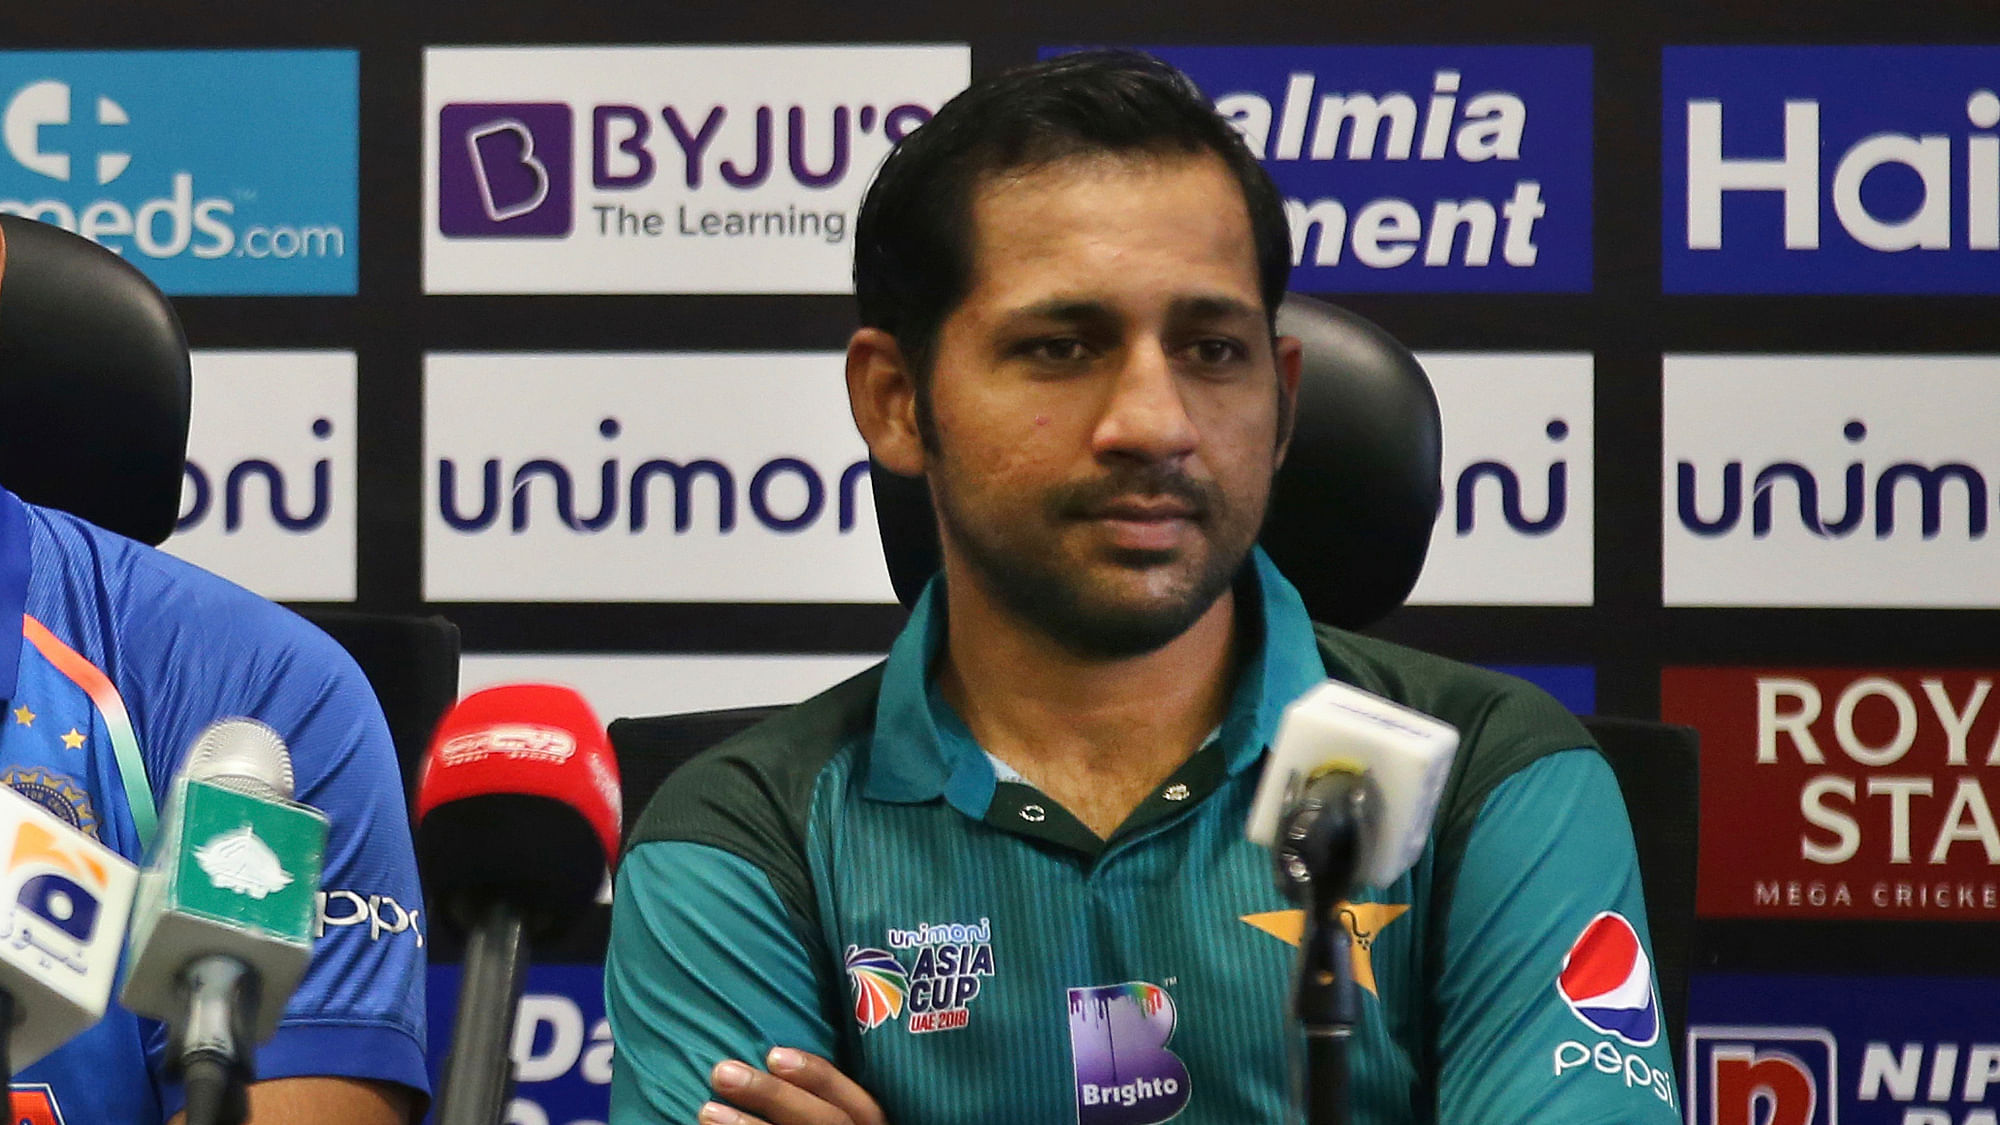 Sarfraz Ahmed spoke to the media on the eve of the India vs Pakistan Asia Cup match in Dubai.